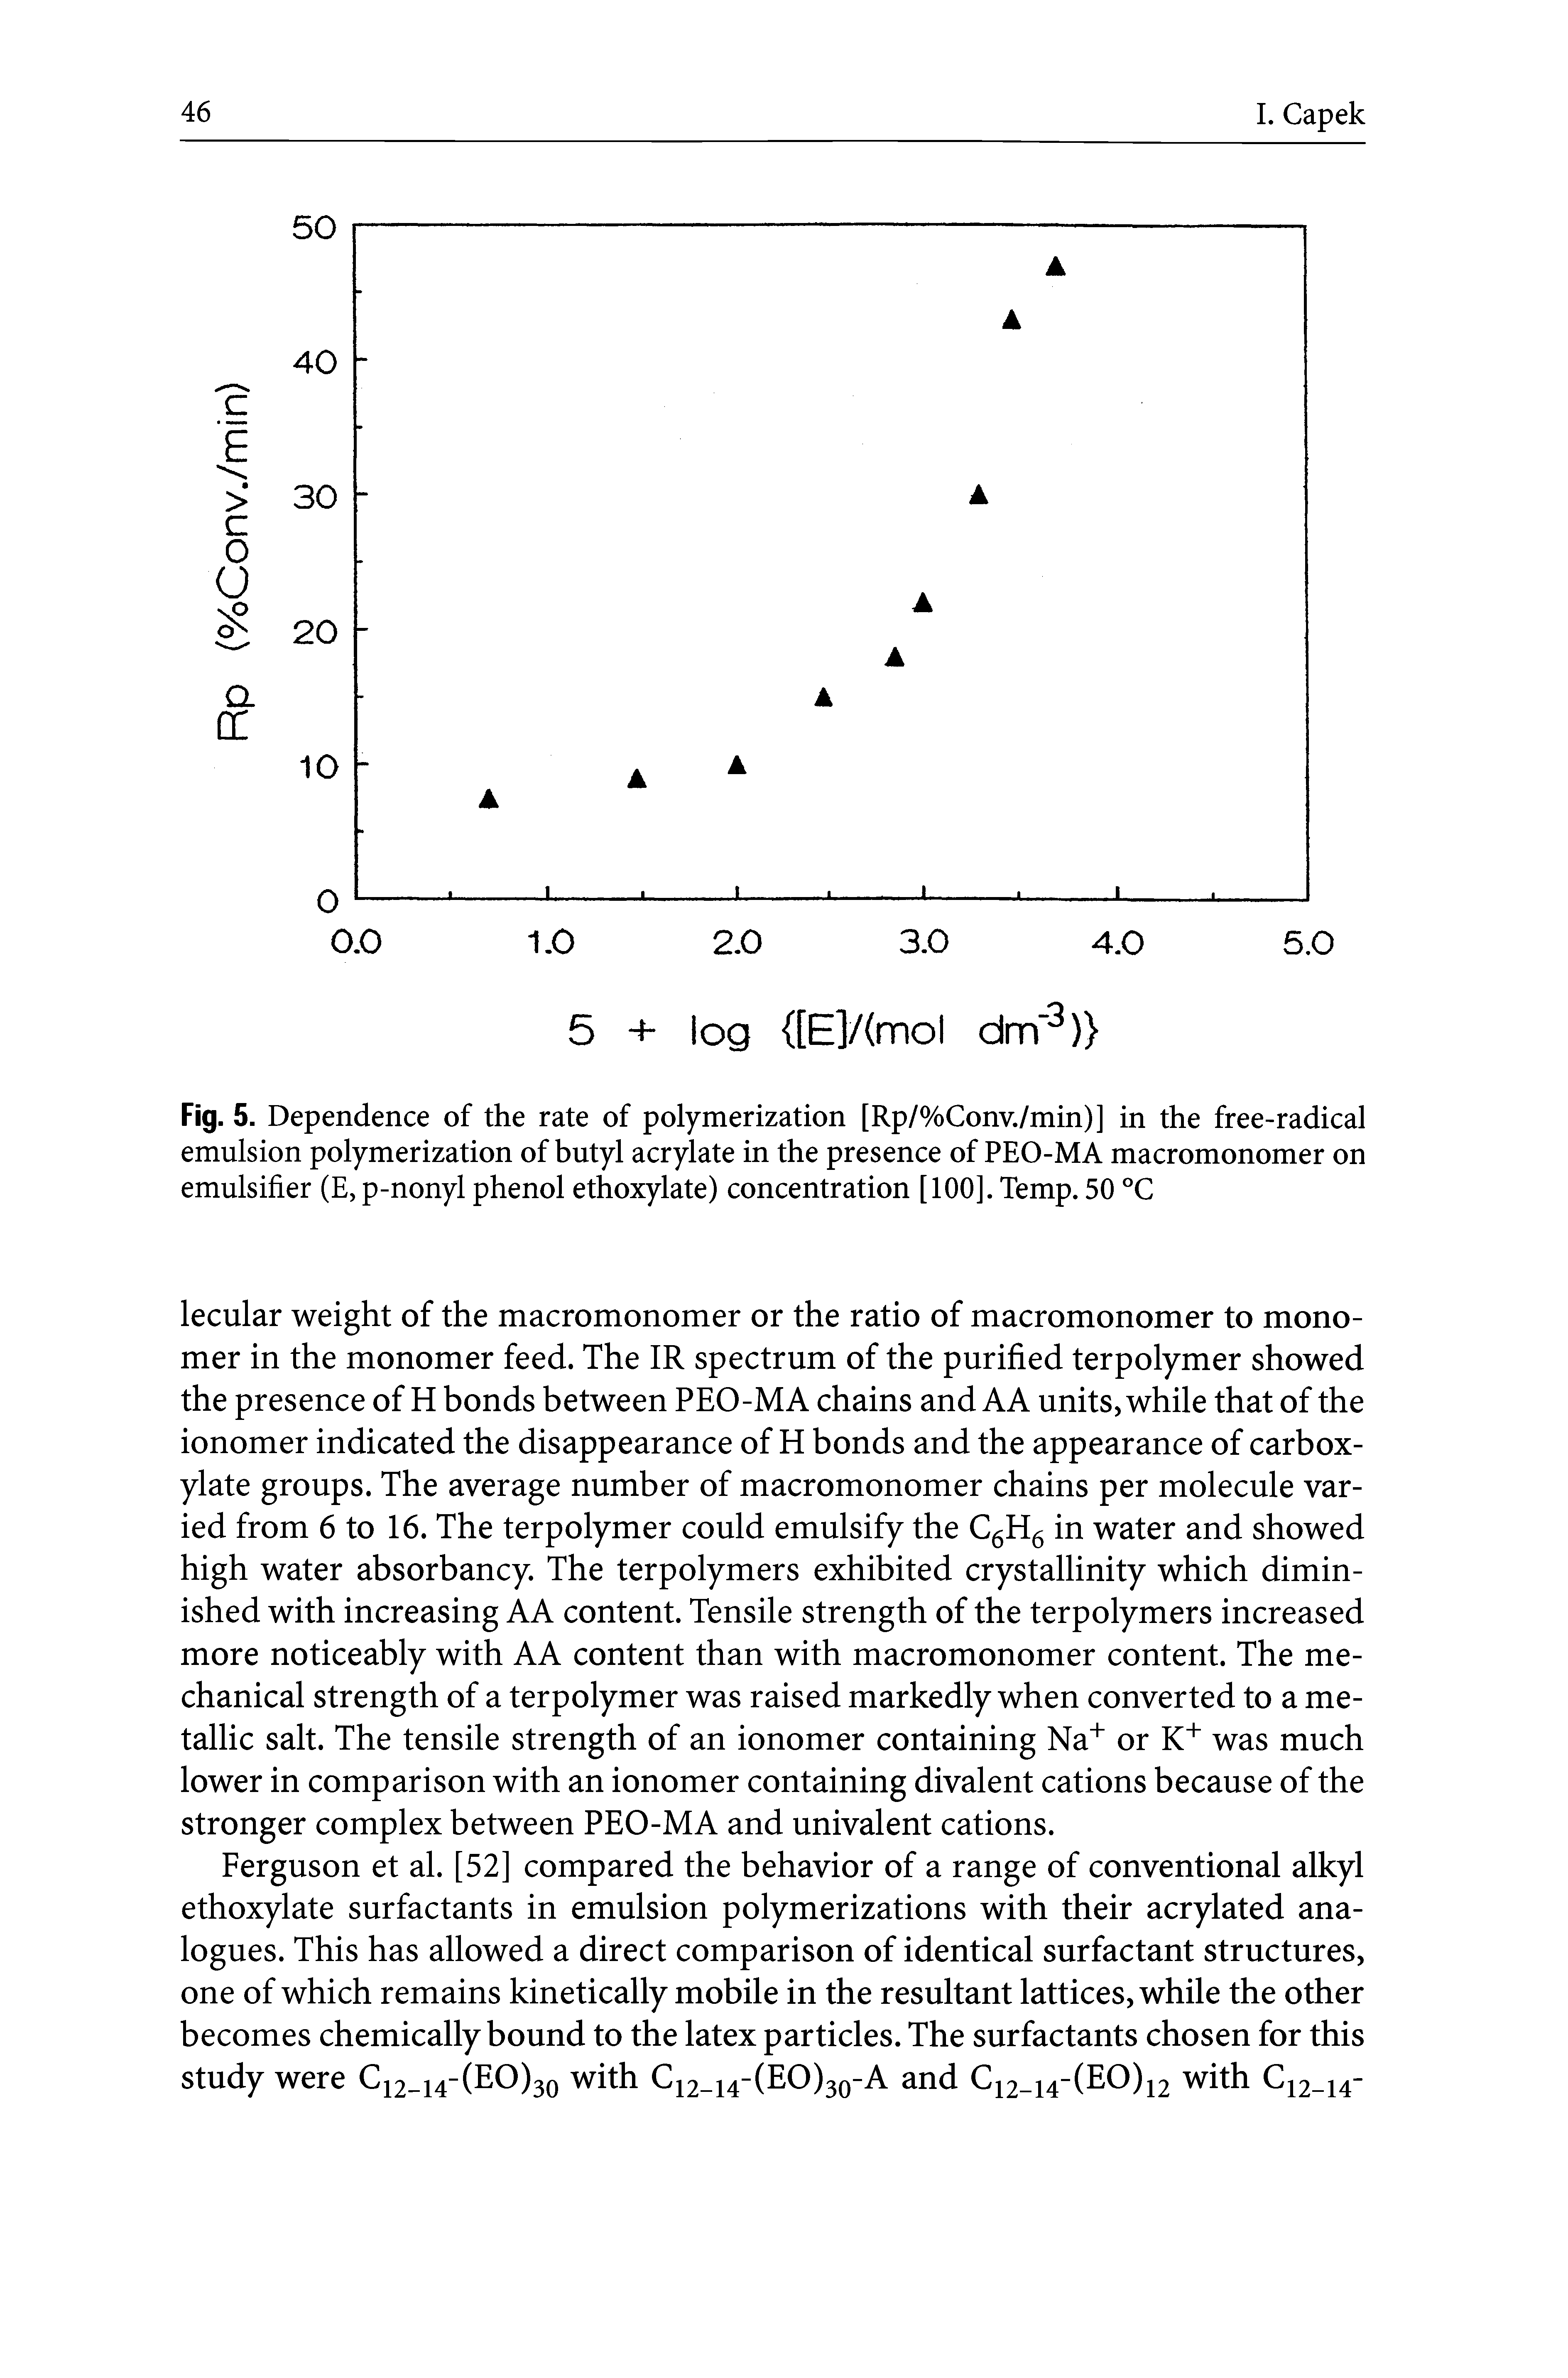 Fig. 5. Dependence of the rate of polymerization [Rp/%Conv./min)] in the free-radical emulsion polymerization of butyl acrylate in the presence of PEO-MA macromonomer on emulsifier (E, p-nonyl phenol ethoxylate) concentration [100]. Temp. 50 °C...